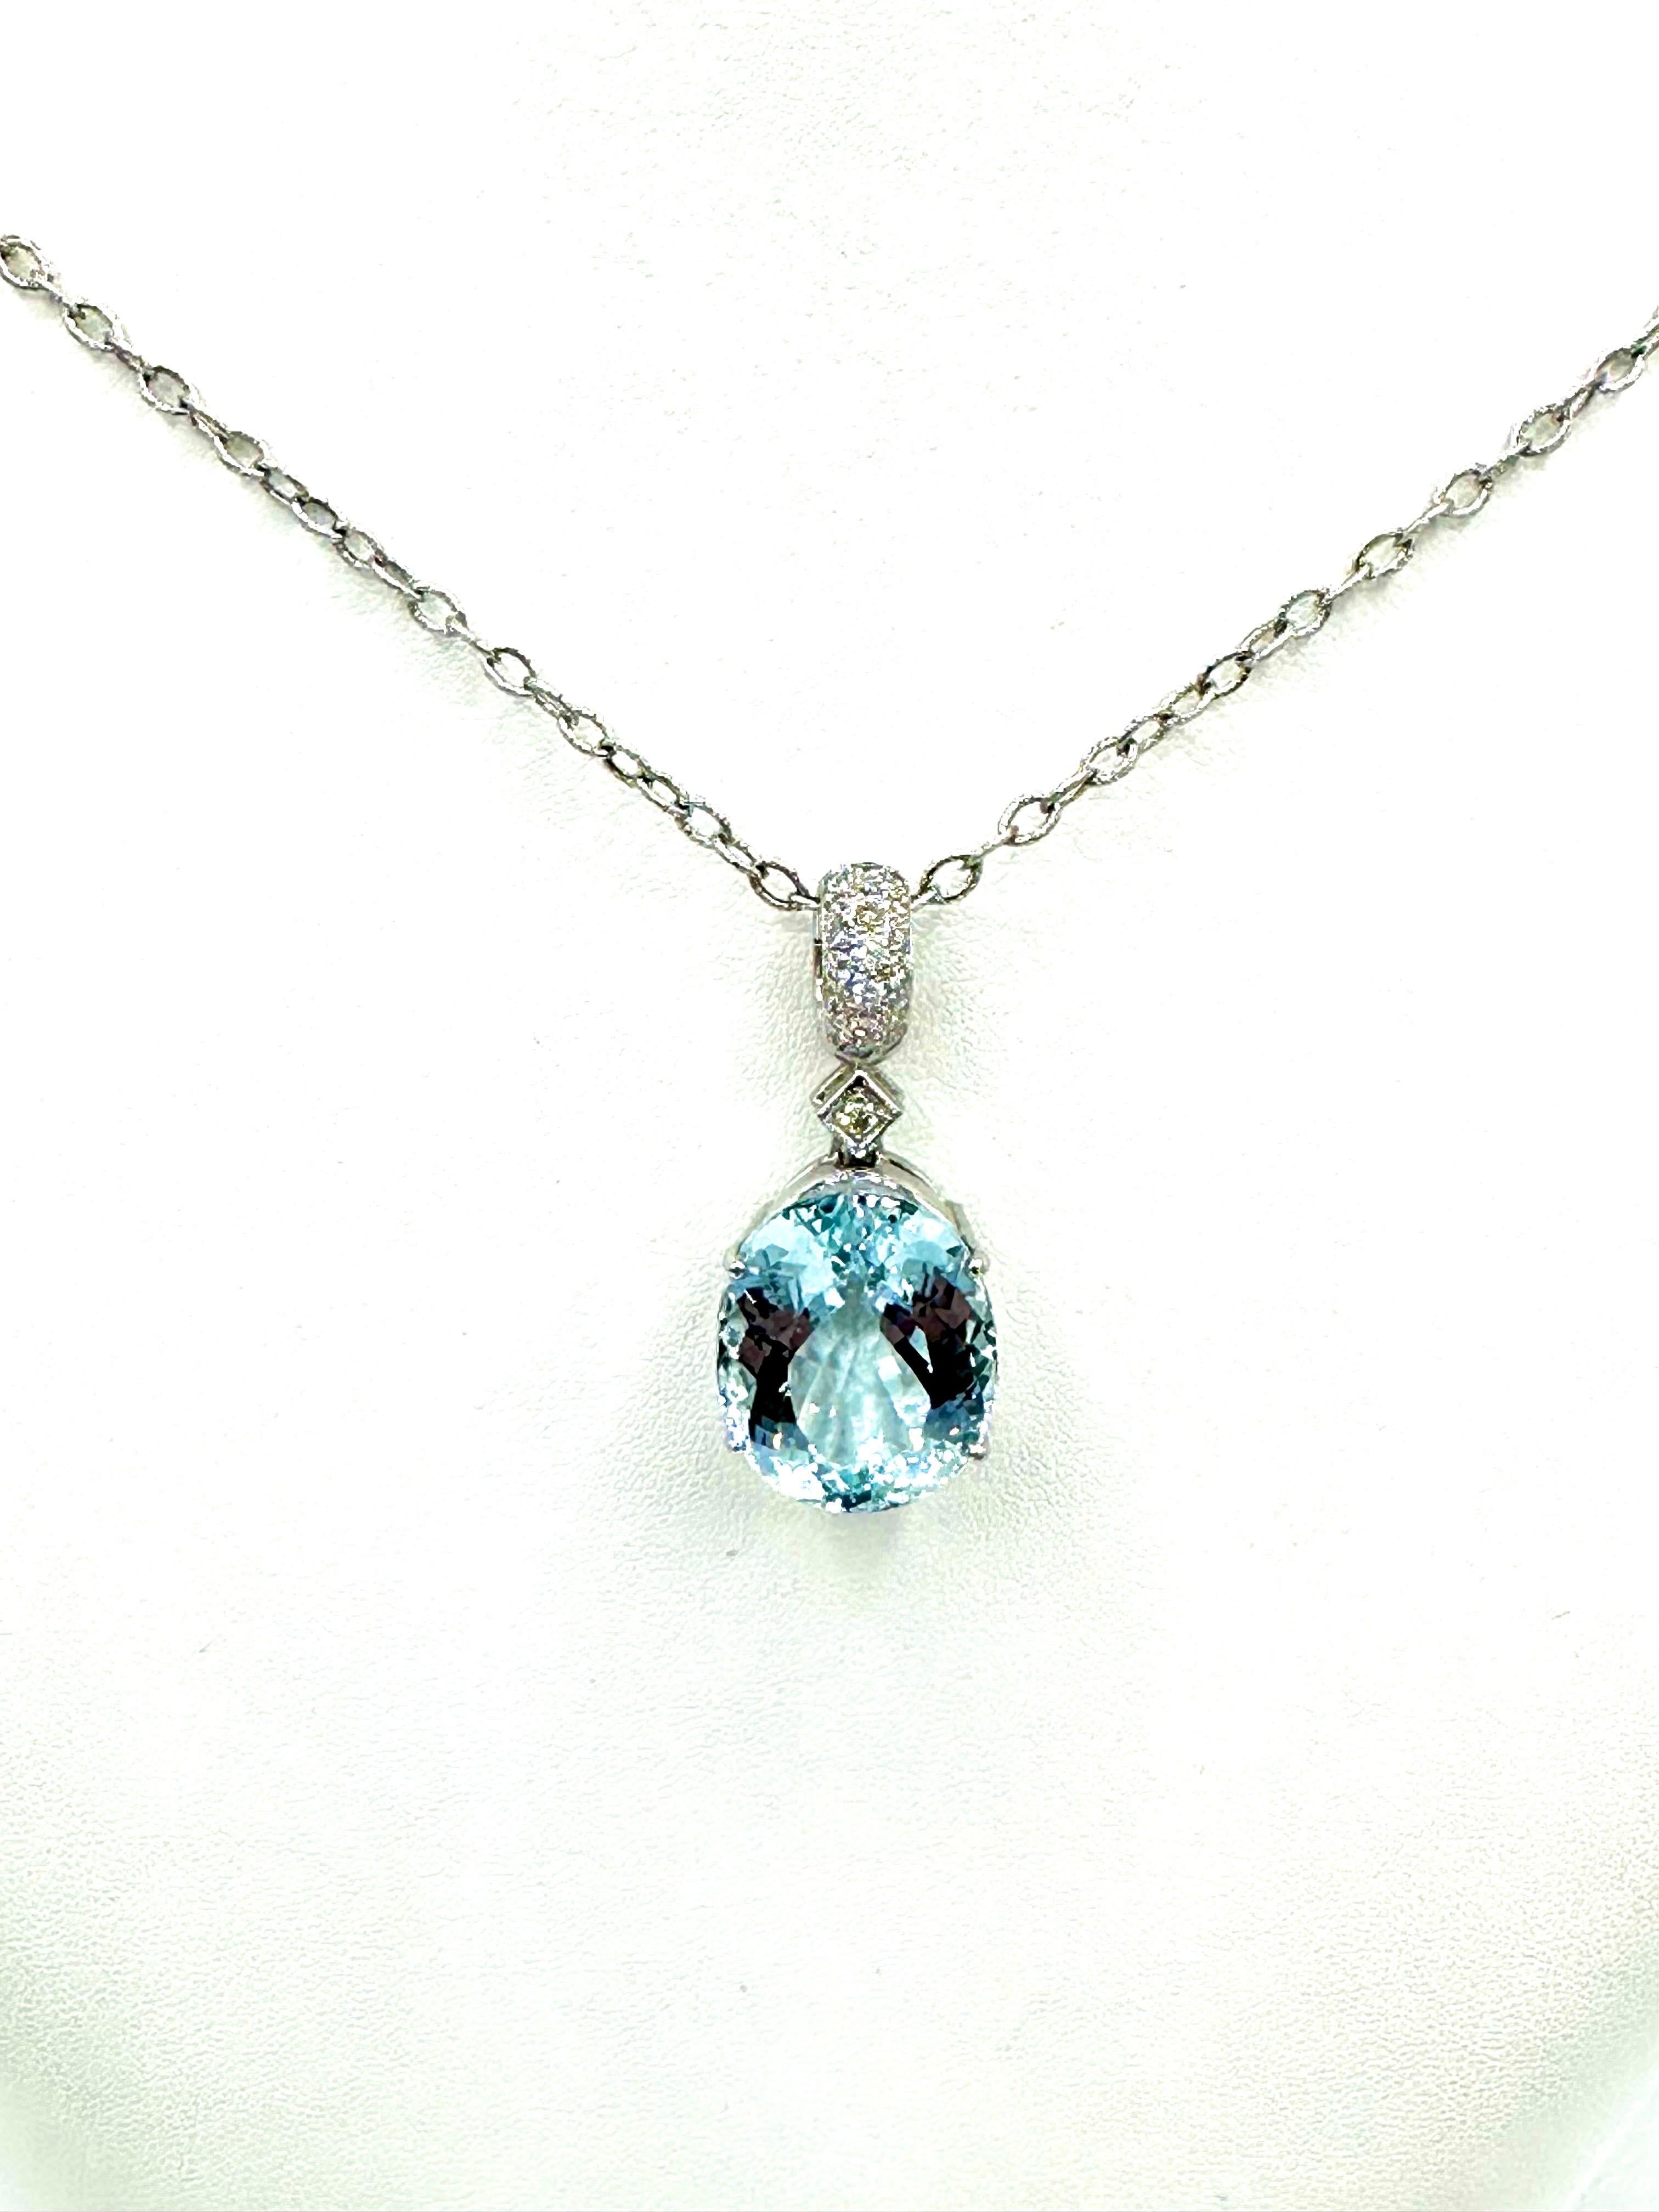 A mesmerizing blue Aquamarine and Diamond pendant!  The 15.08 carats Aqua is set in a four prong basket setting, suspended from a single Diamond station and pave Diamond bale.  The Diamond and pave Diamonds have a total weight of 0.34 carats.  The